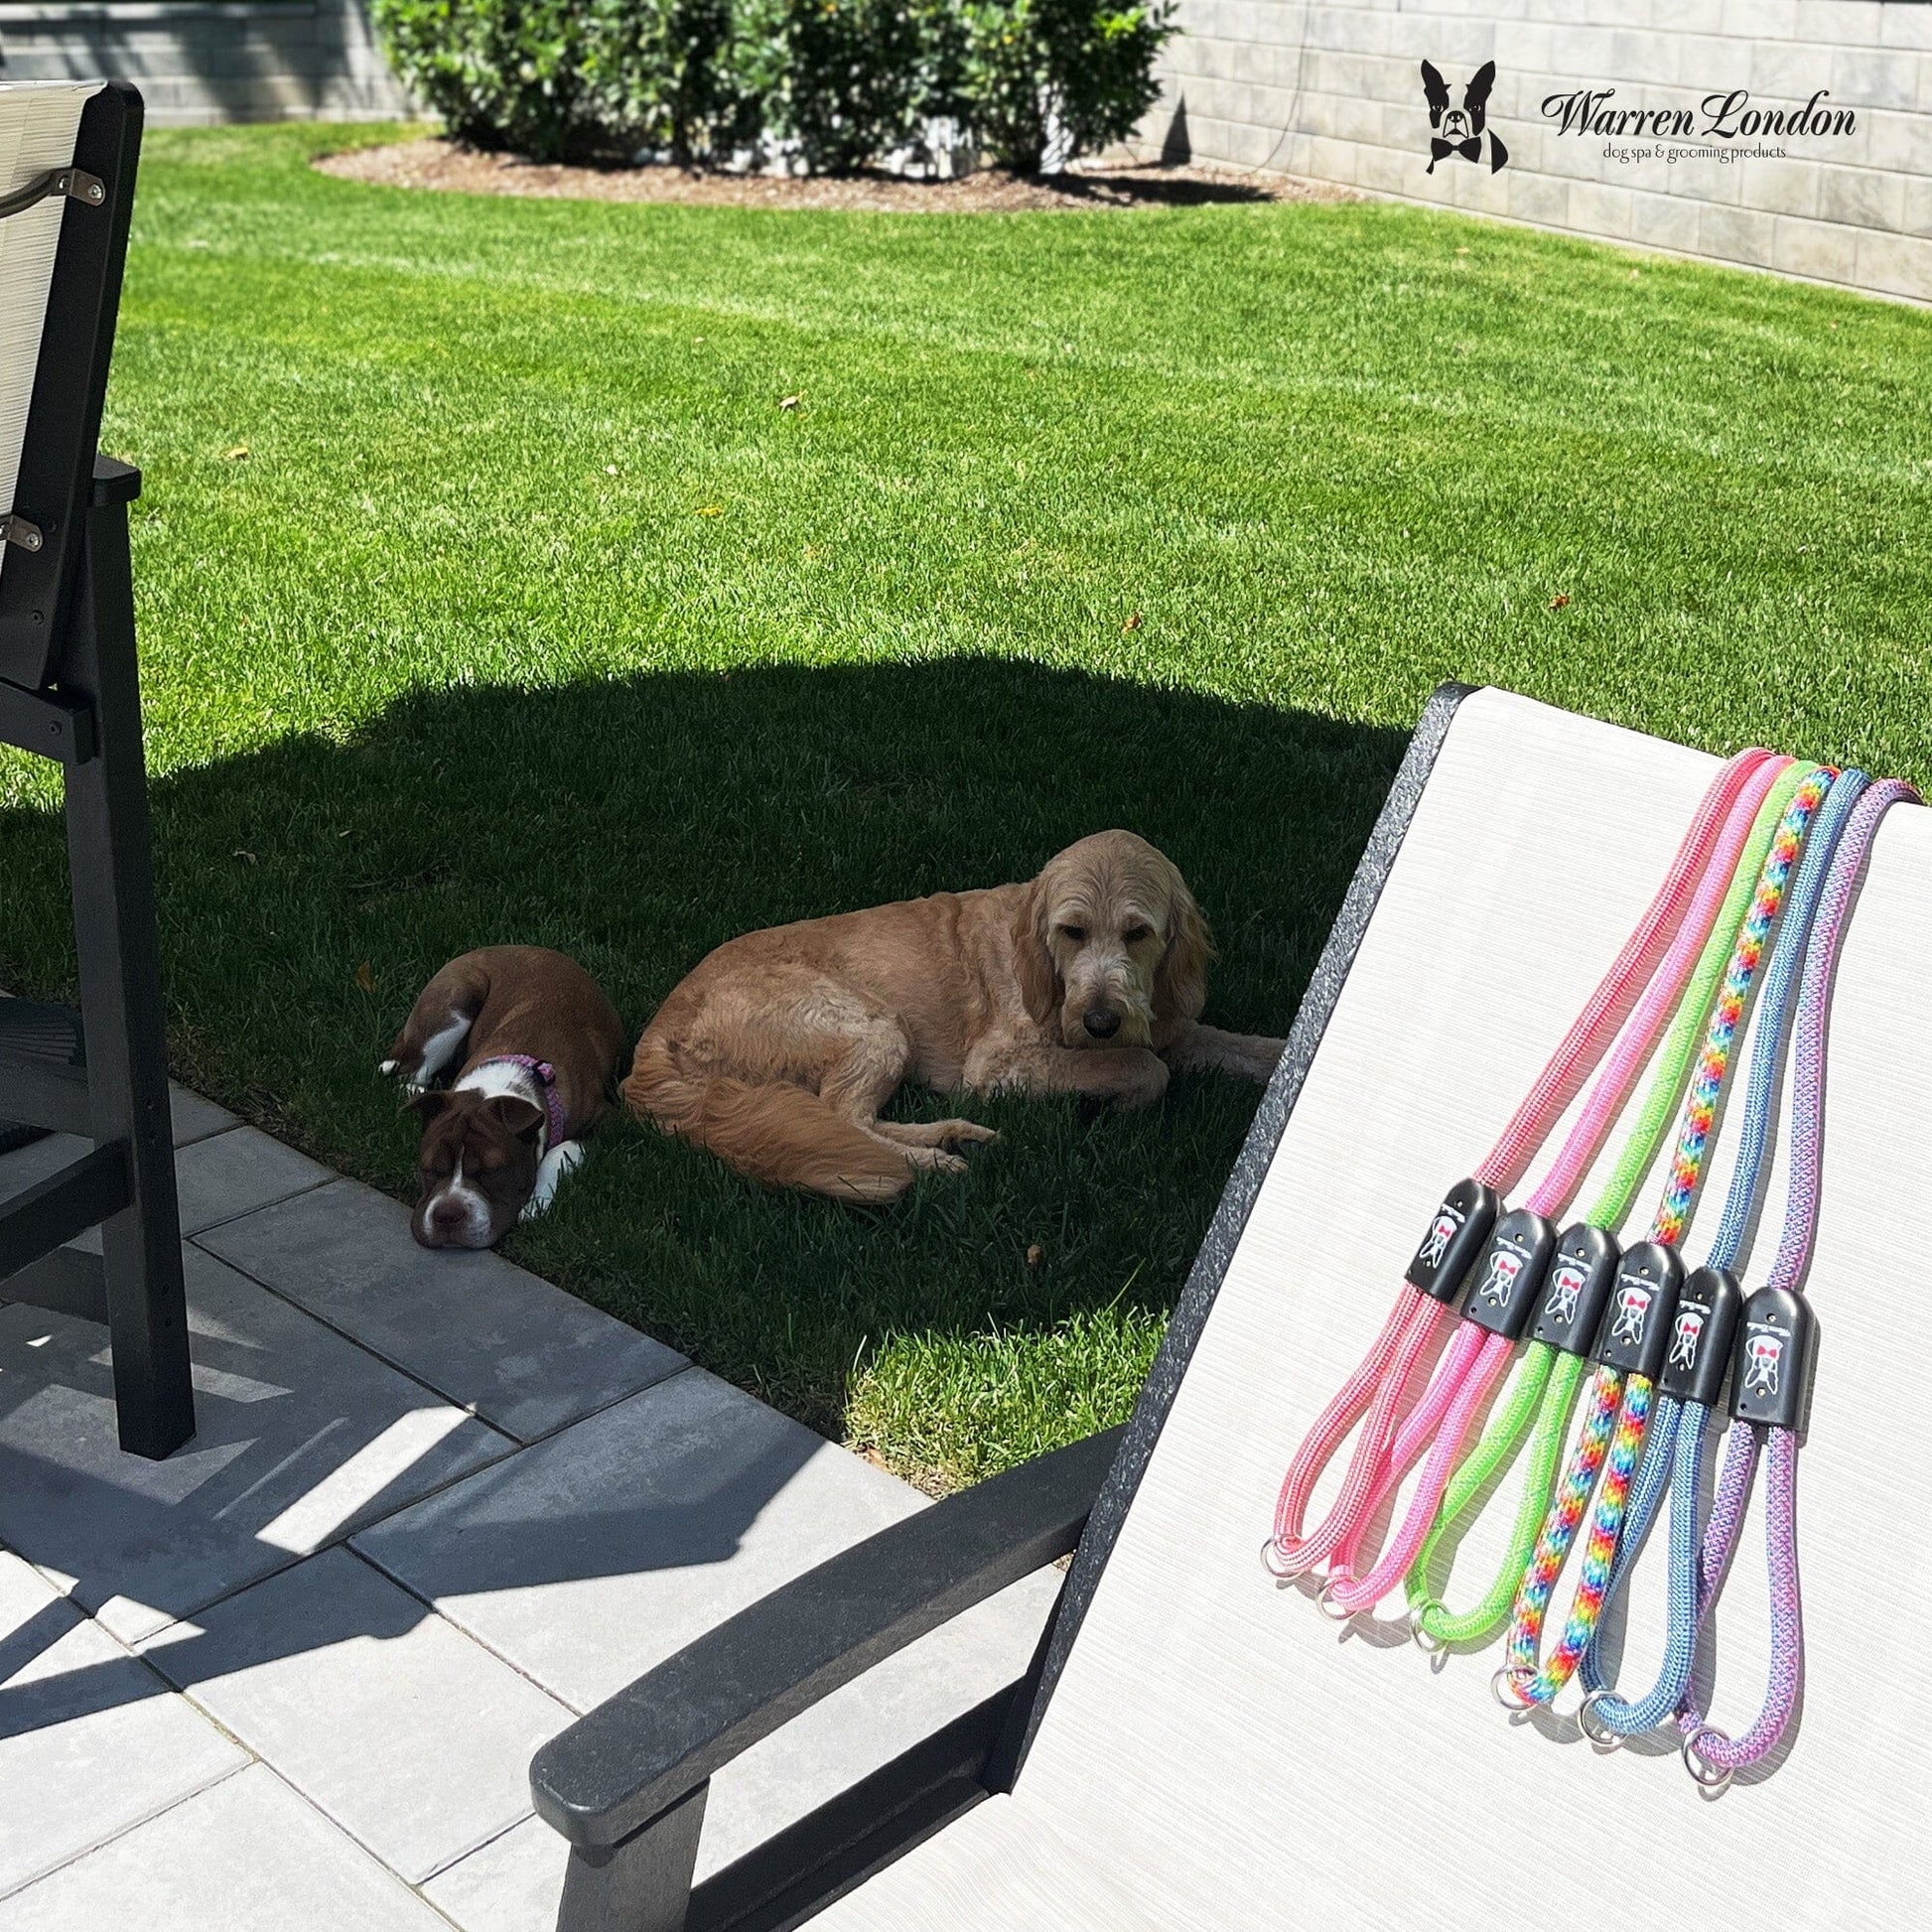 Rope Leash - Green Reflective Leashes, Collars & Accessories Warren London 